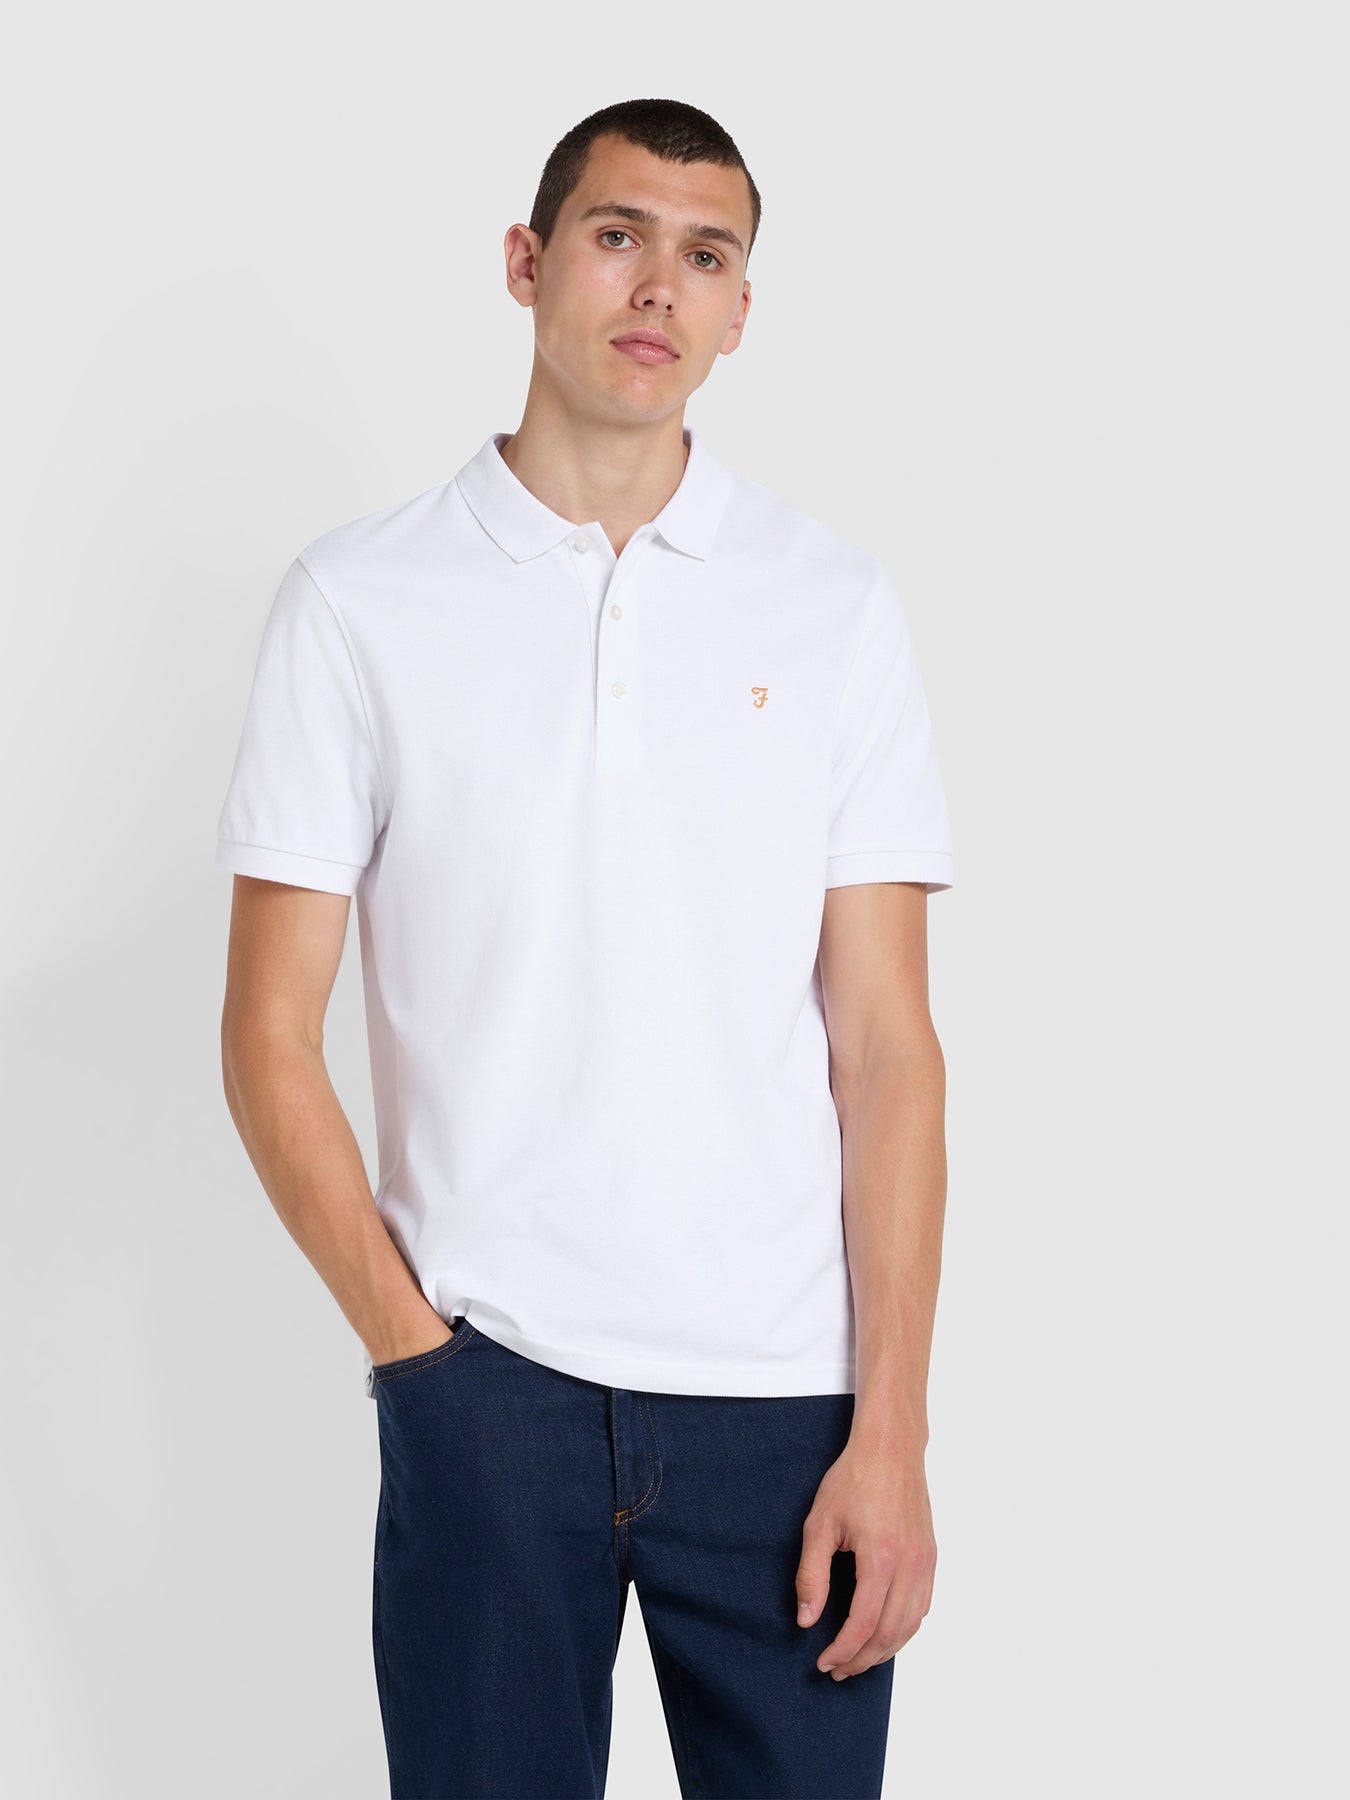 View Blanes Slim Fit Organic Cotton Polo Shirt In White information